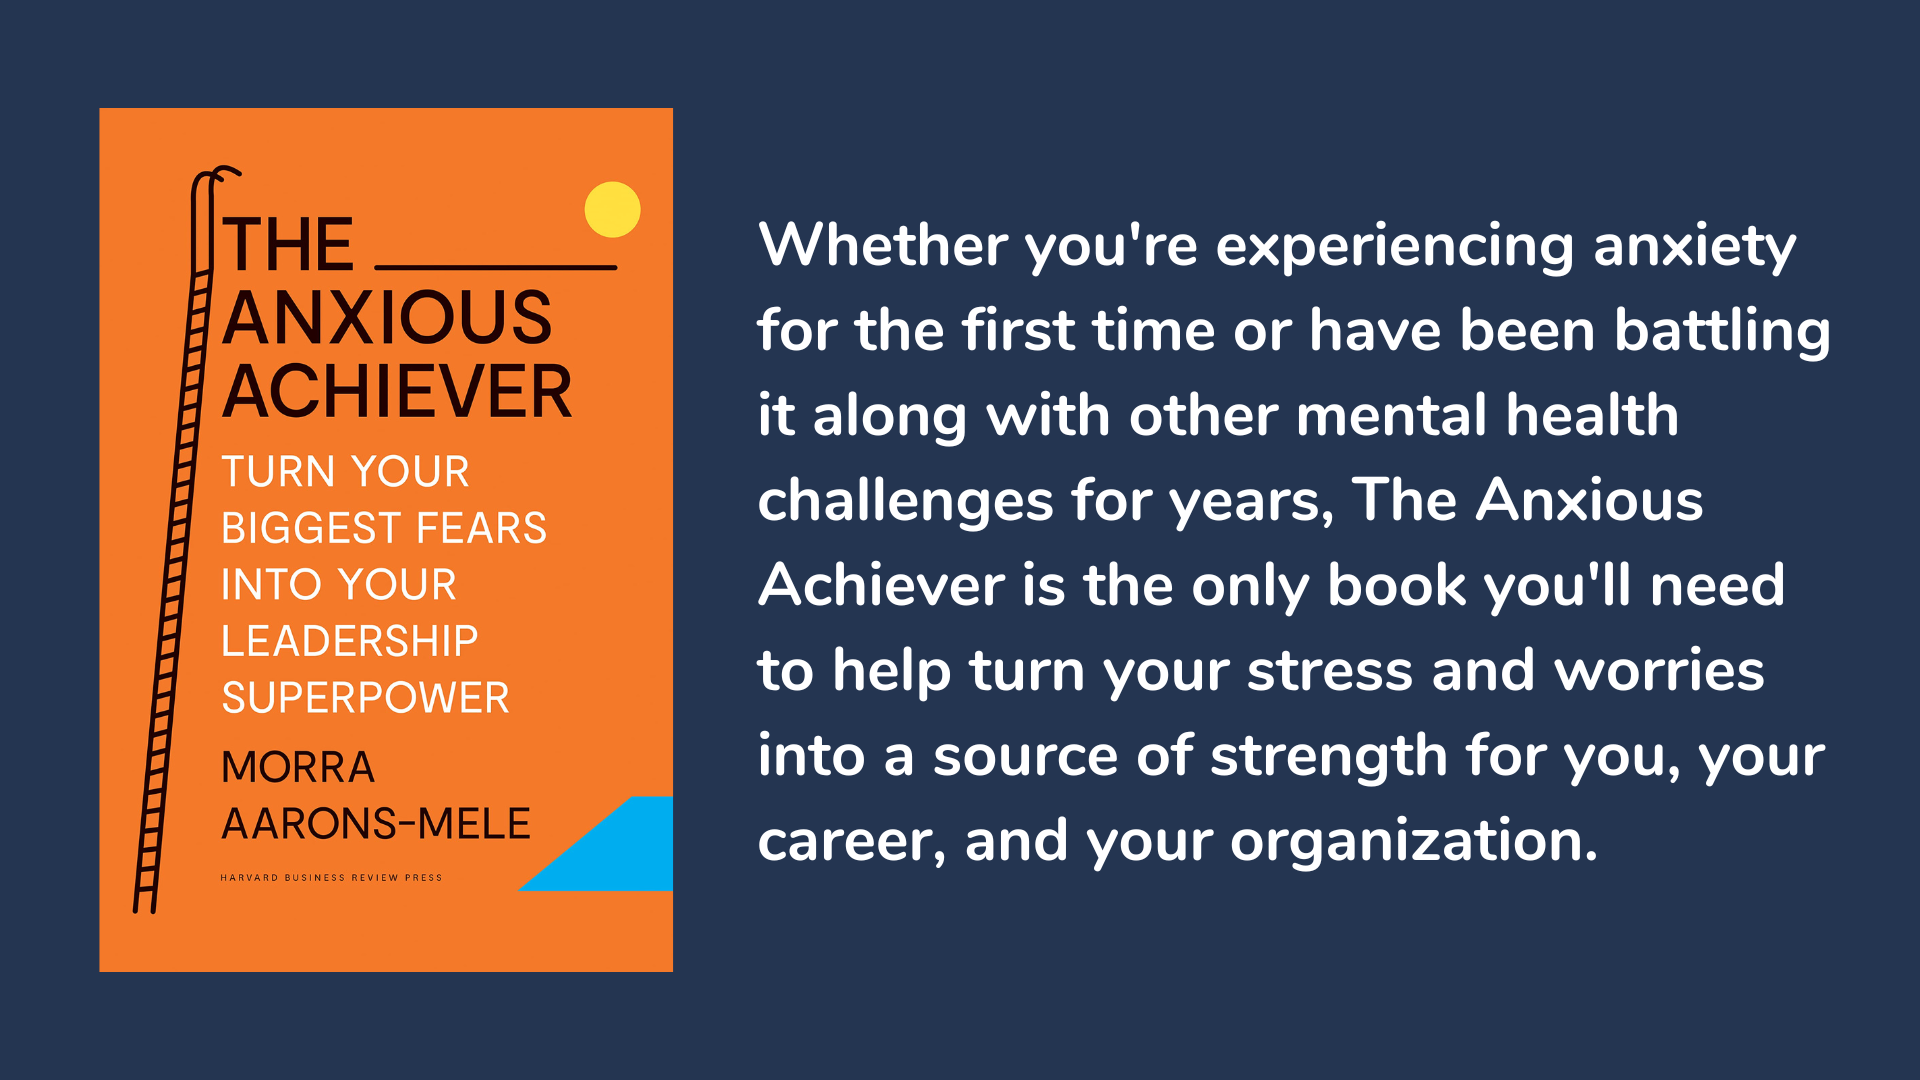 The Anxious Achiever: Turn Your Biggest Fears into Your Leadership Superpower, book cover and description.